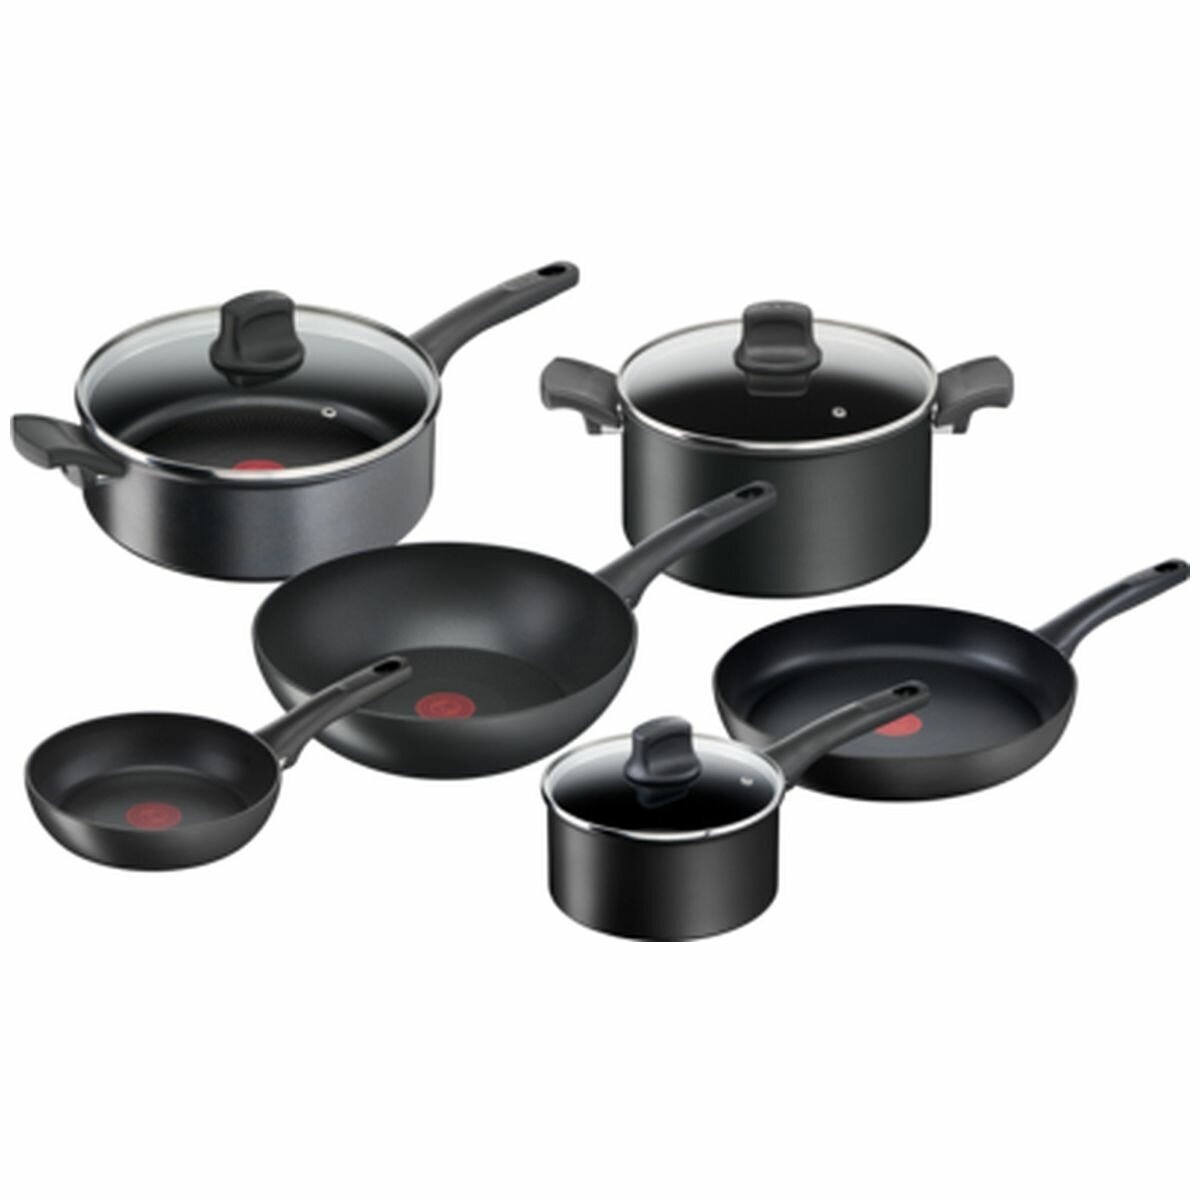 https://www.winnings.com.au/ak/a/f/a/7/afa7121278518ad56a32e53b2a2074cce6ed9373_tefal_ultimate_non_stick_induction_6_piece_cookware_set_g2689316_1_f5f84b8b_high-high.jpeg